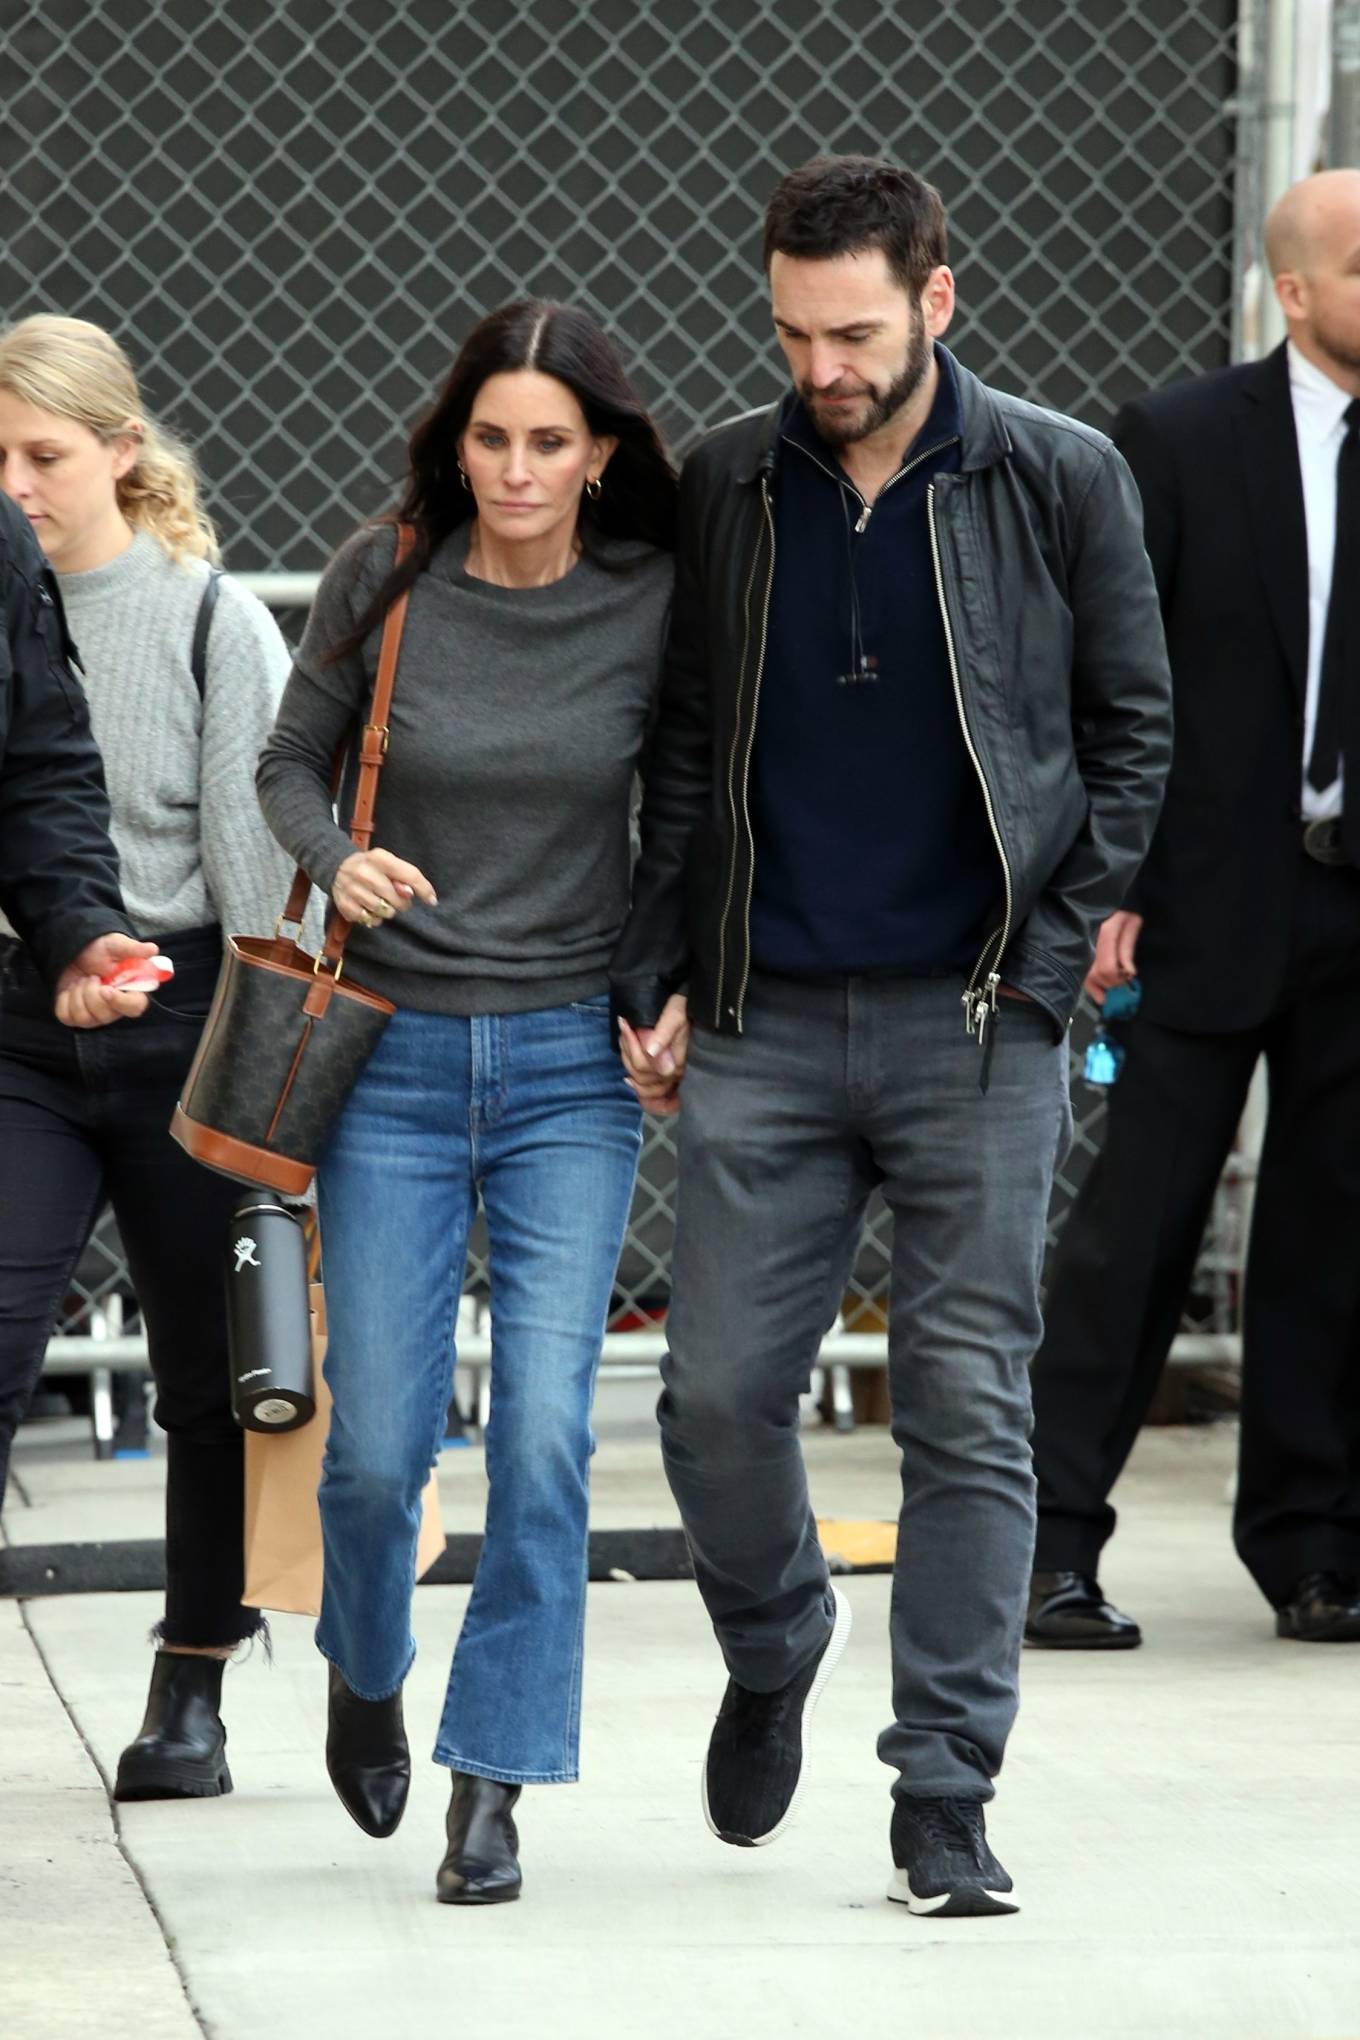 Courteney Cox - With her boyfriend Johnny McDaid at the El Capitan Entertainment Centre